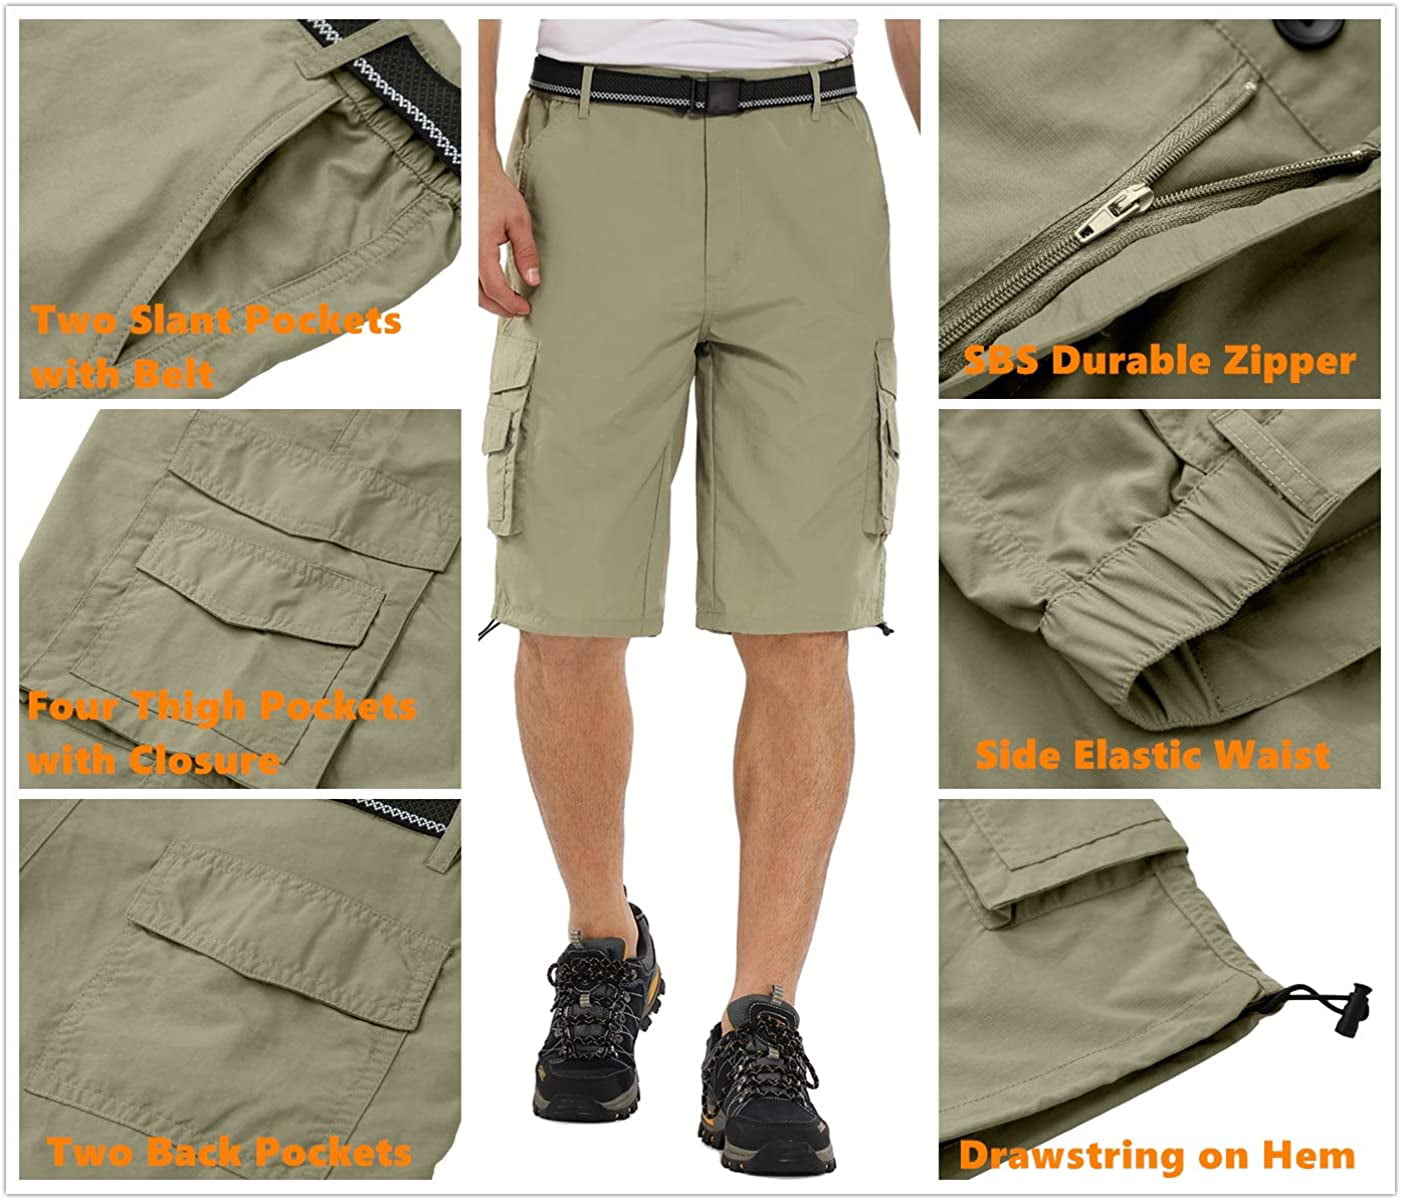 Mens Outdoor Casual Expandable Waist Lightweight Water Resistant Quick Dry Cargo Fishing Hiking Shorts